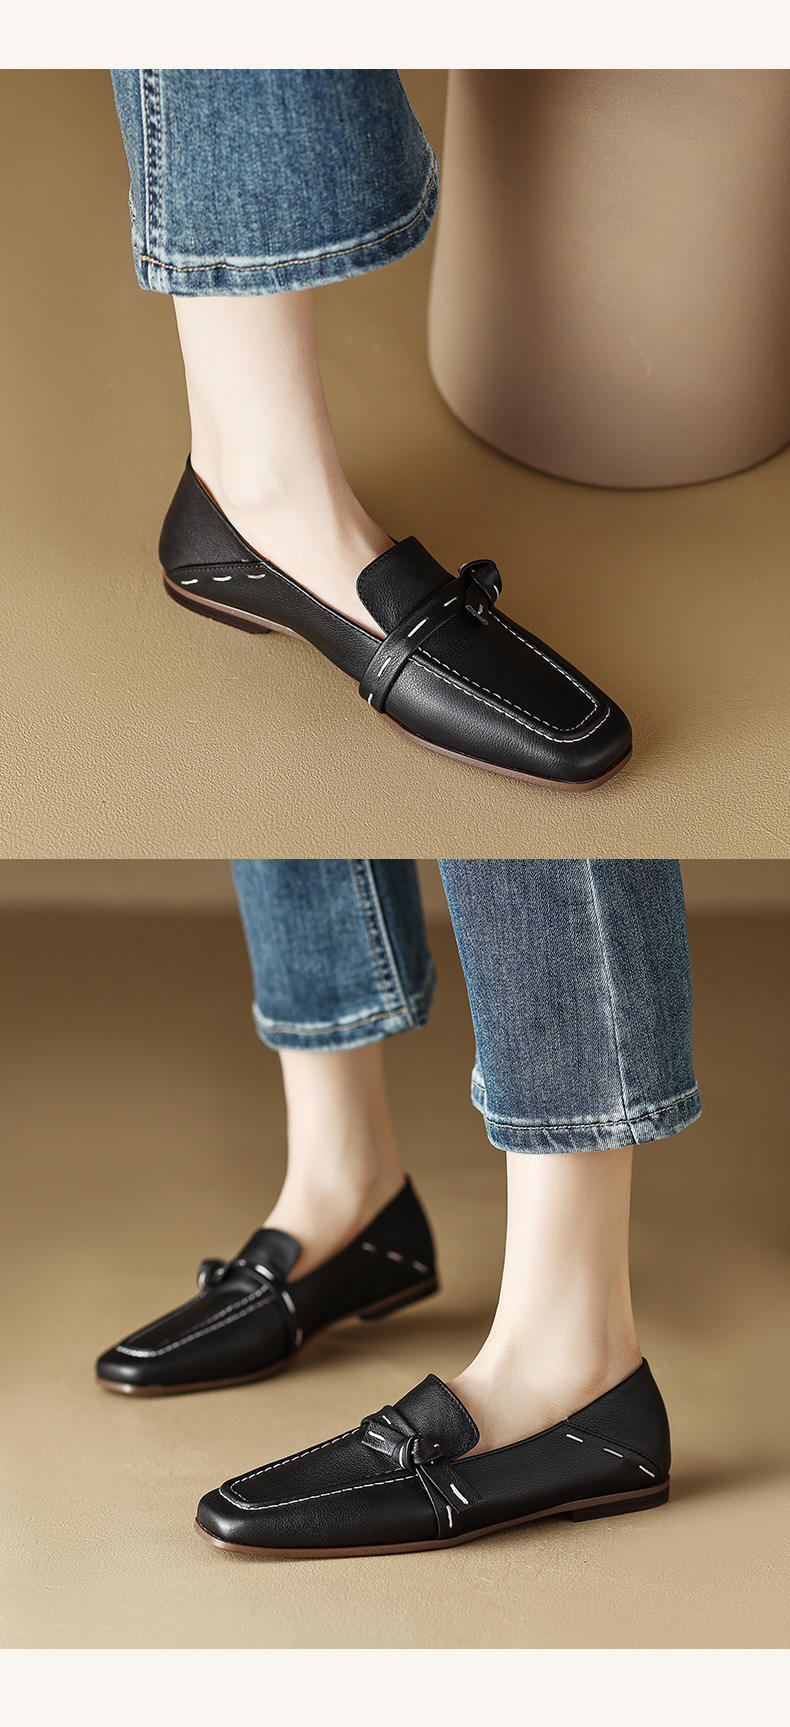 CHIKO Andi Square Toe Block Heels Loafers Shoes